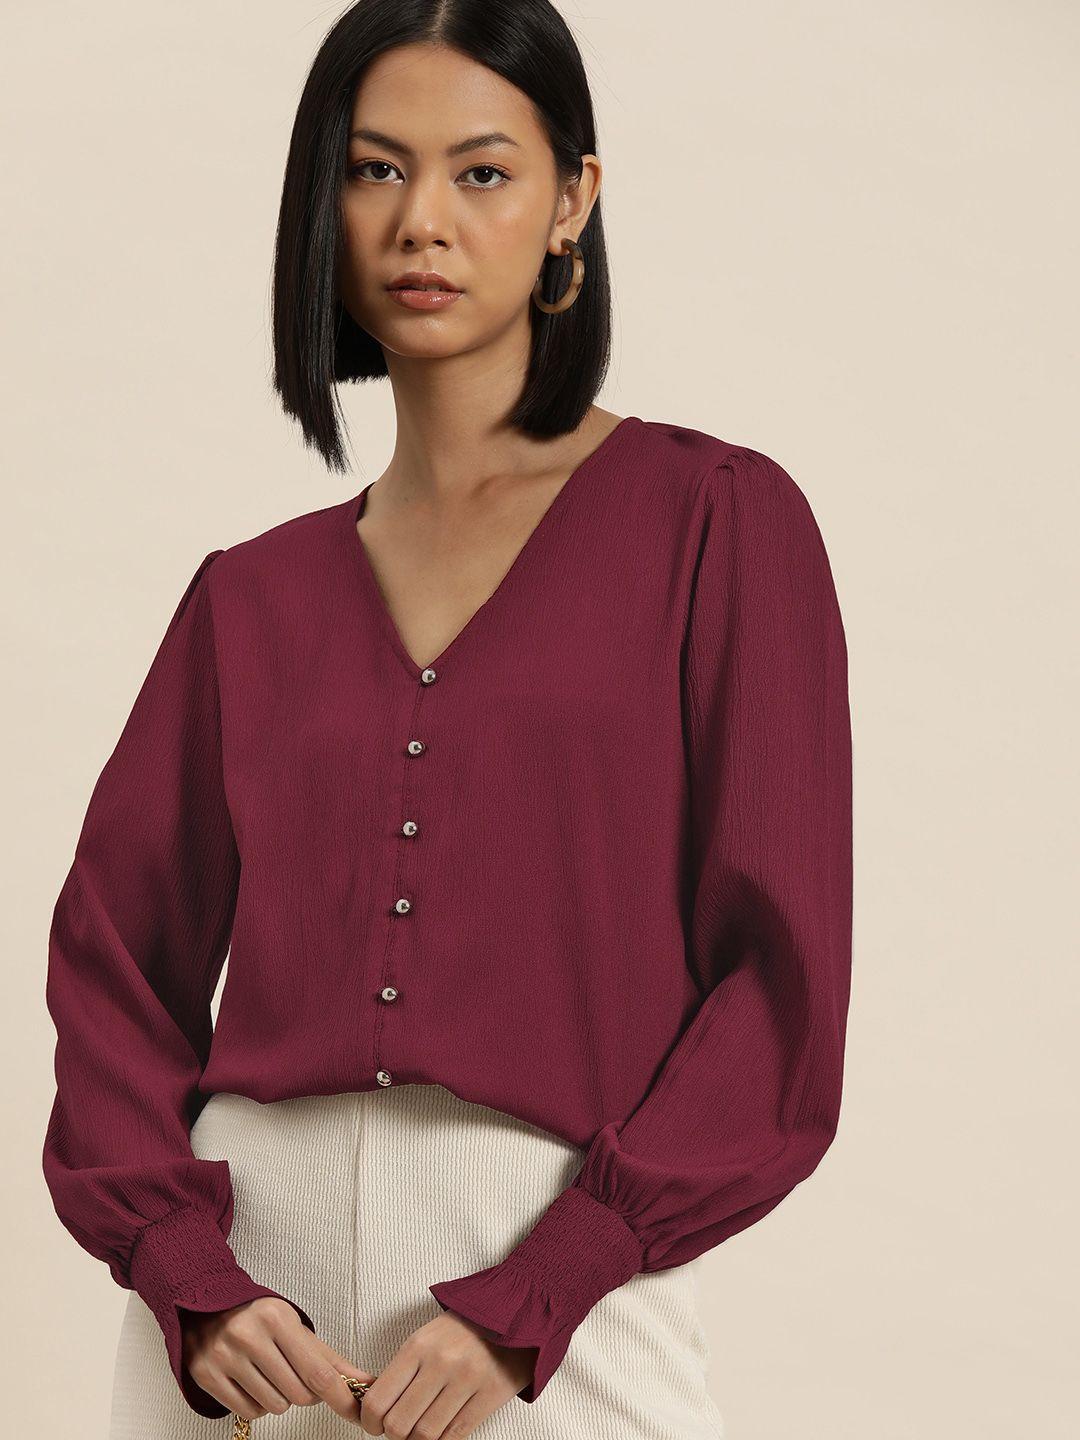 invictus puff sleeve crepe shirt style top